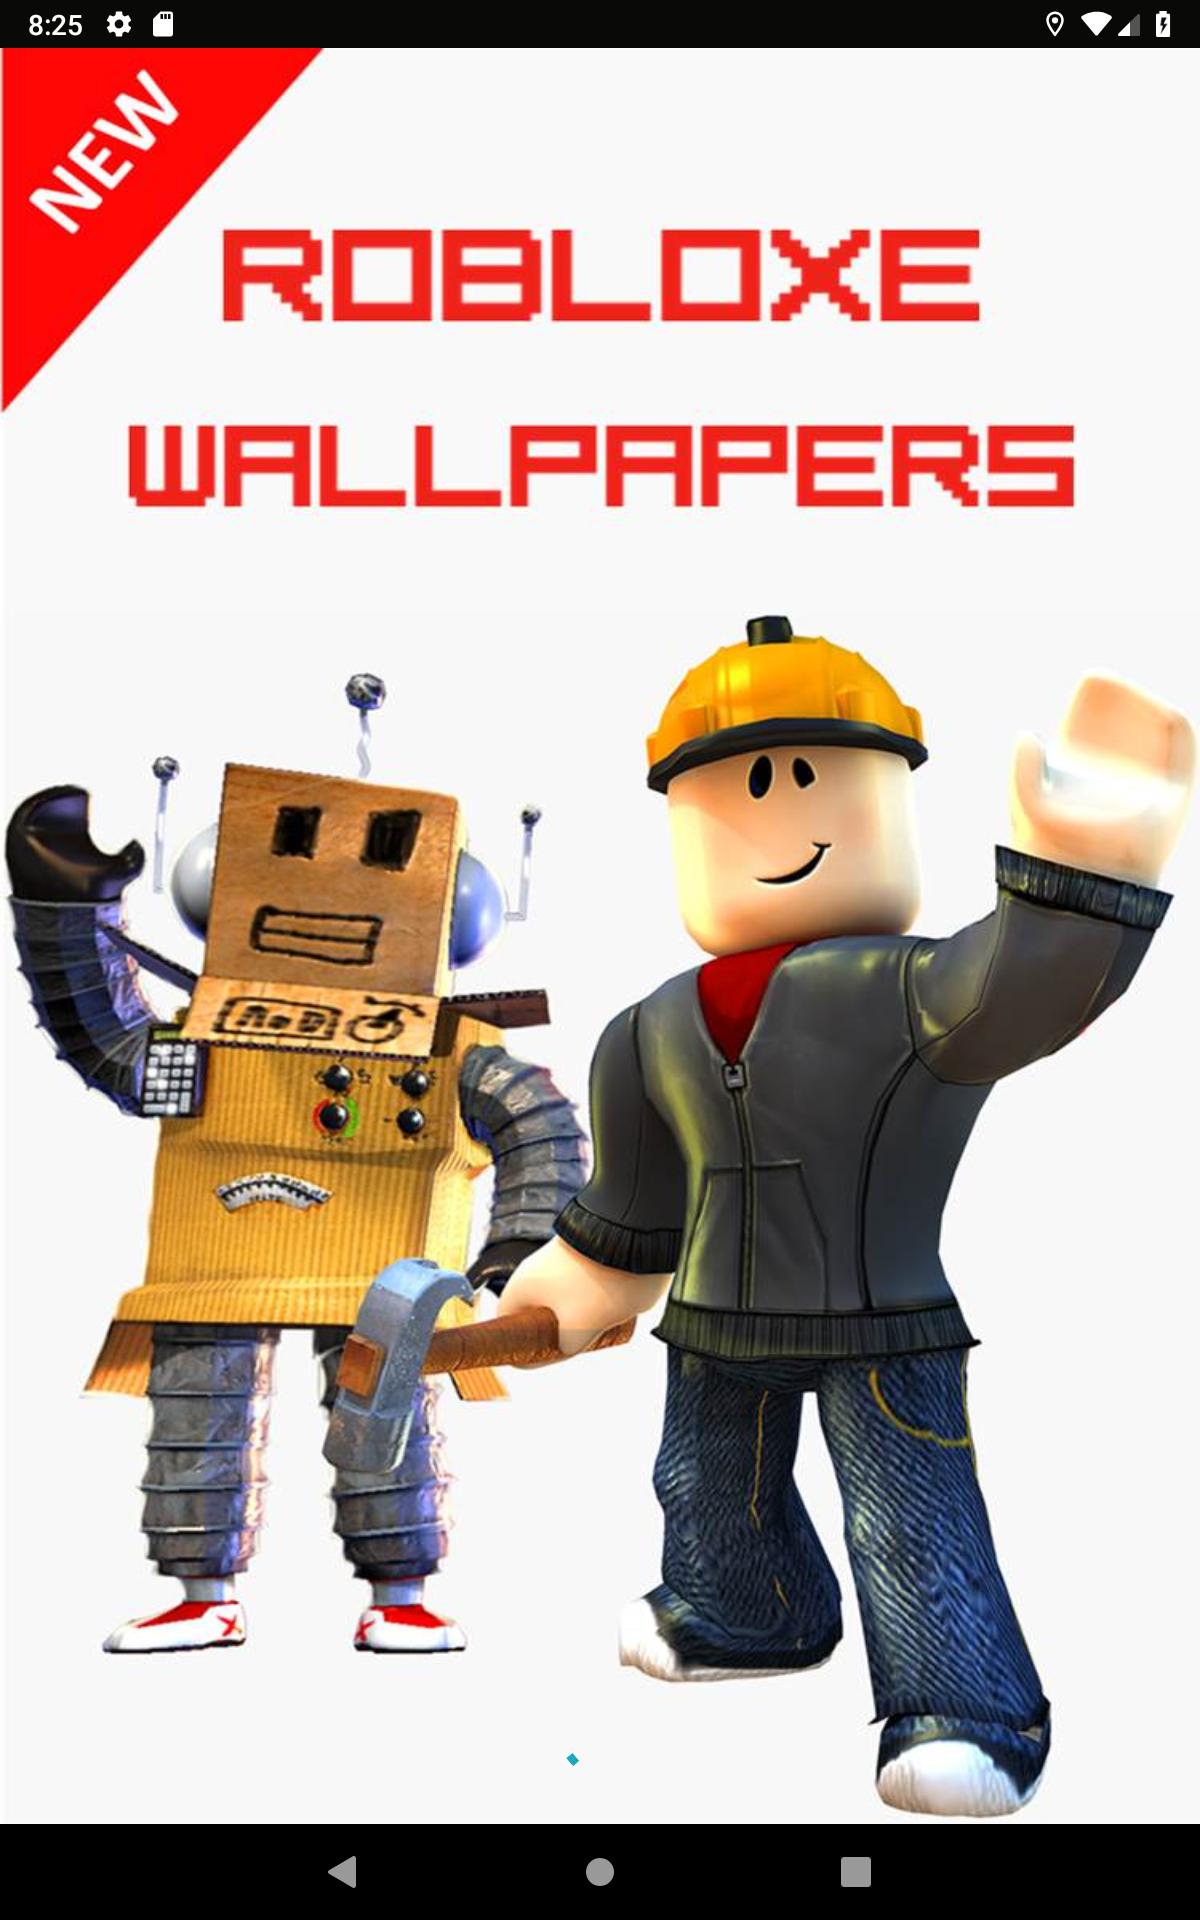 Wallpapers For Robloxe Hd For Android Apk Download - fortnite dances roblox /e